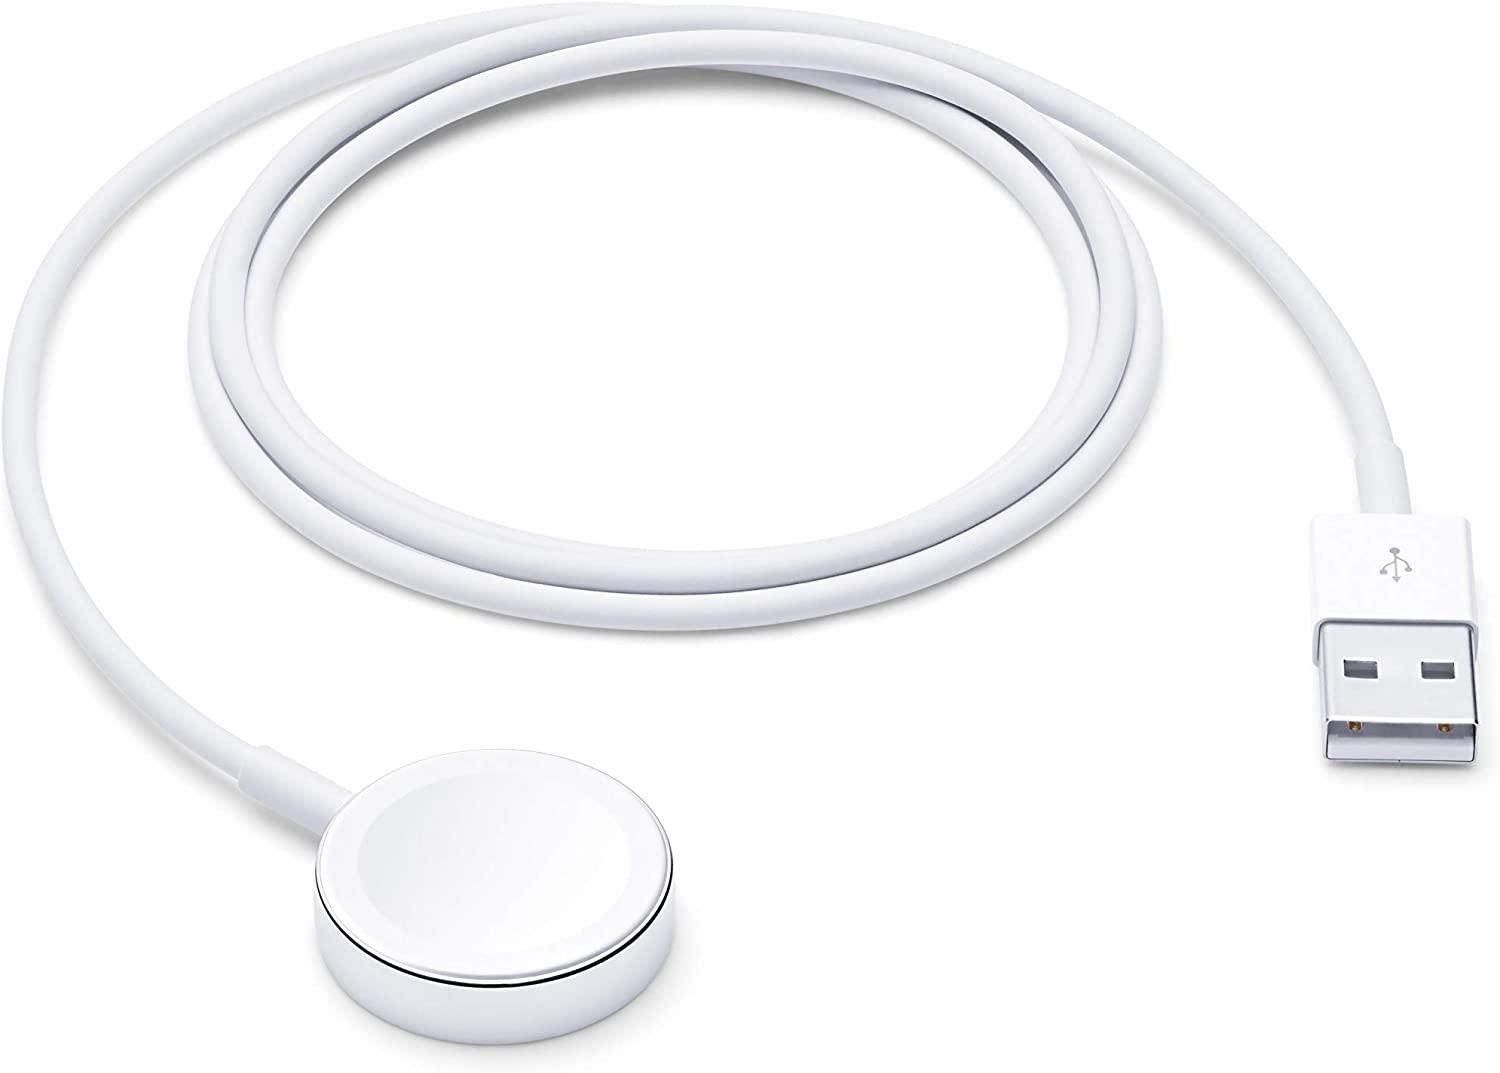 Apple Watch Magnetic Charging Cable for $18.88